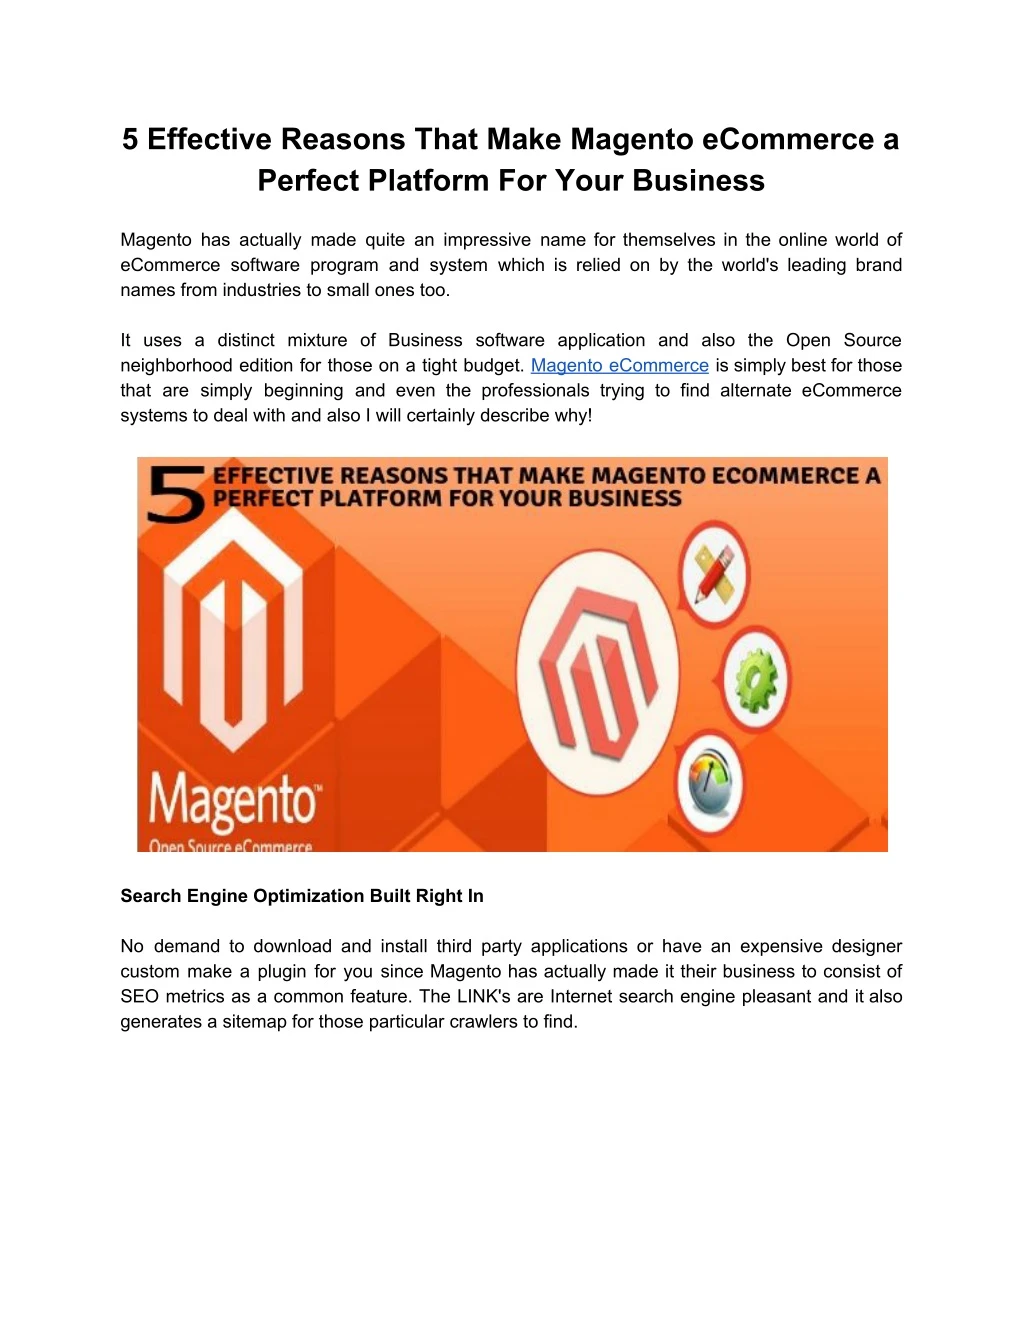 5 effective reasons that make magento ecommerce